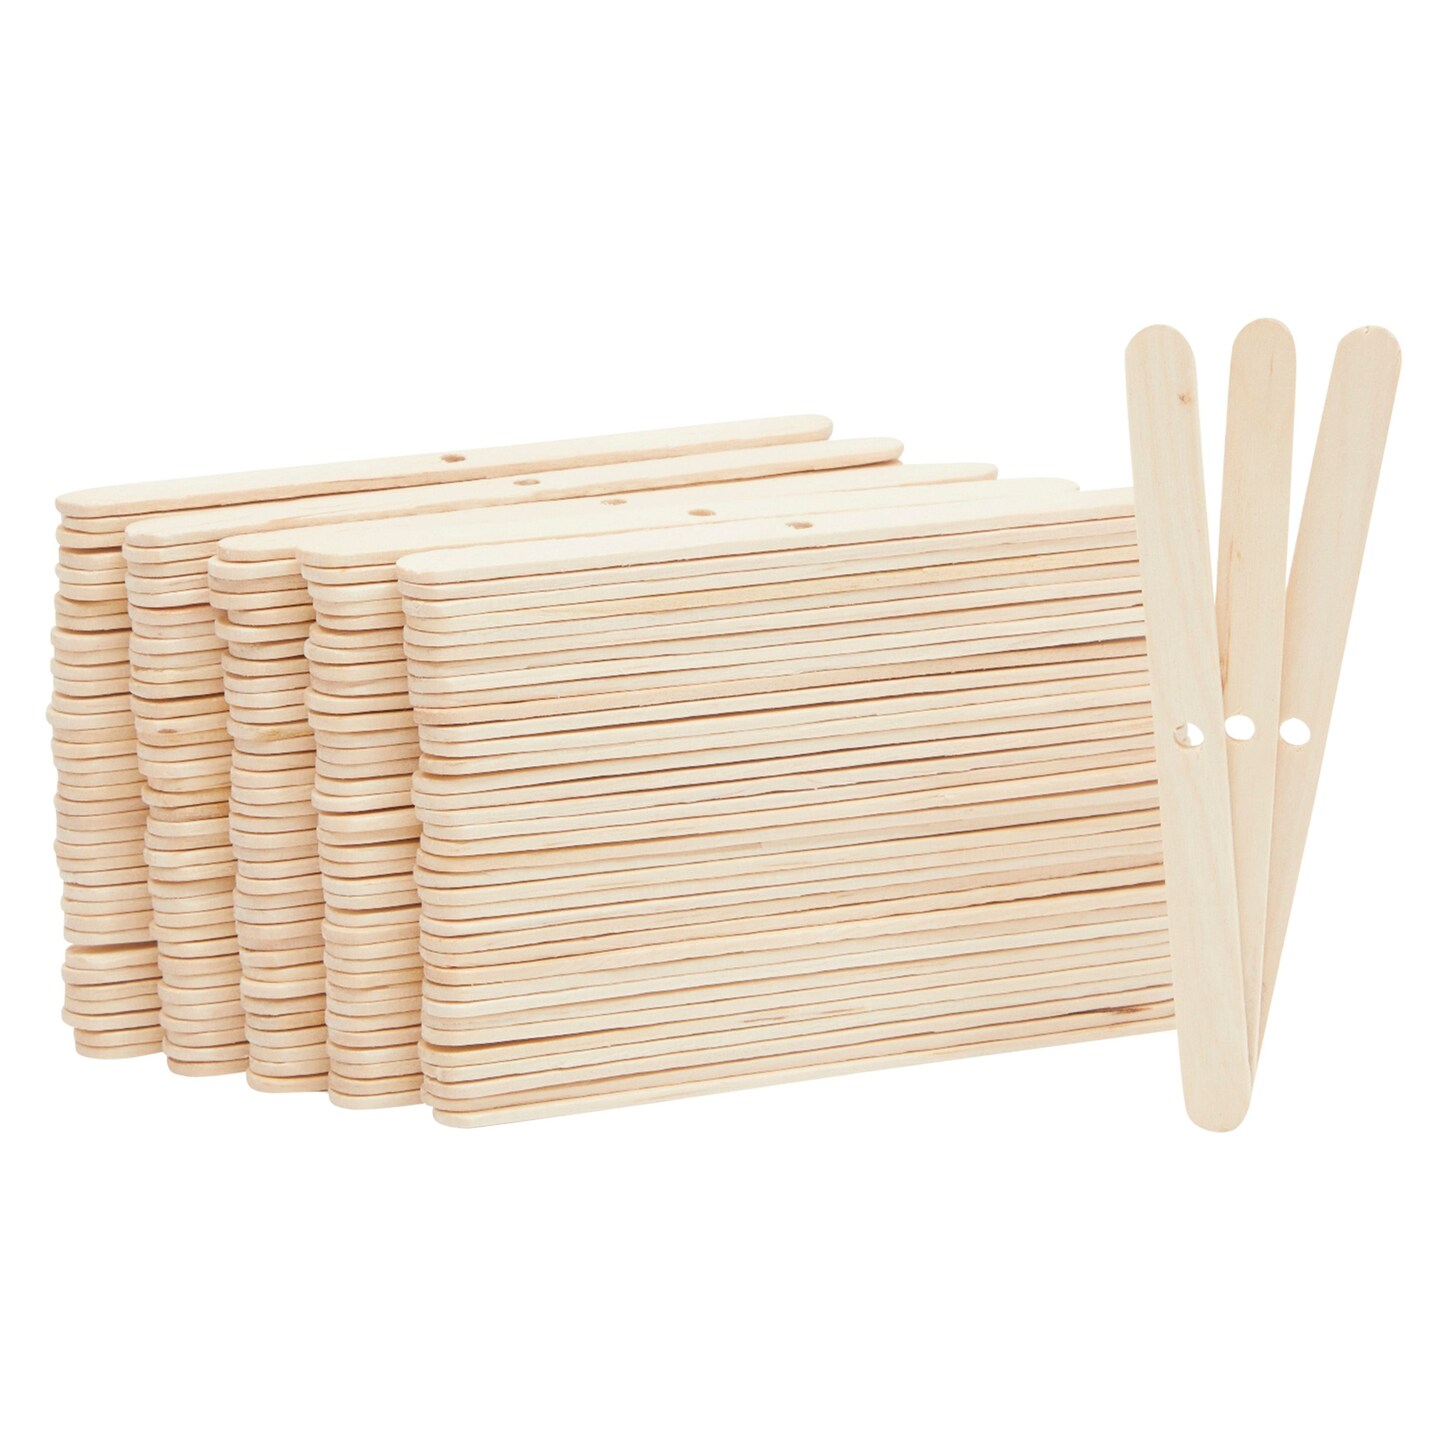 Wooden Candle Wick Holders,Candle Wicks Centering Device,Candle Wick Bars, Wick Holders for Candle Making,Wick Clips for Candles,Candle Centering  Tool,120 Pack